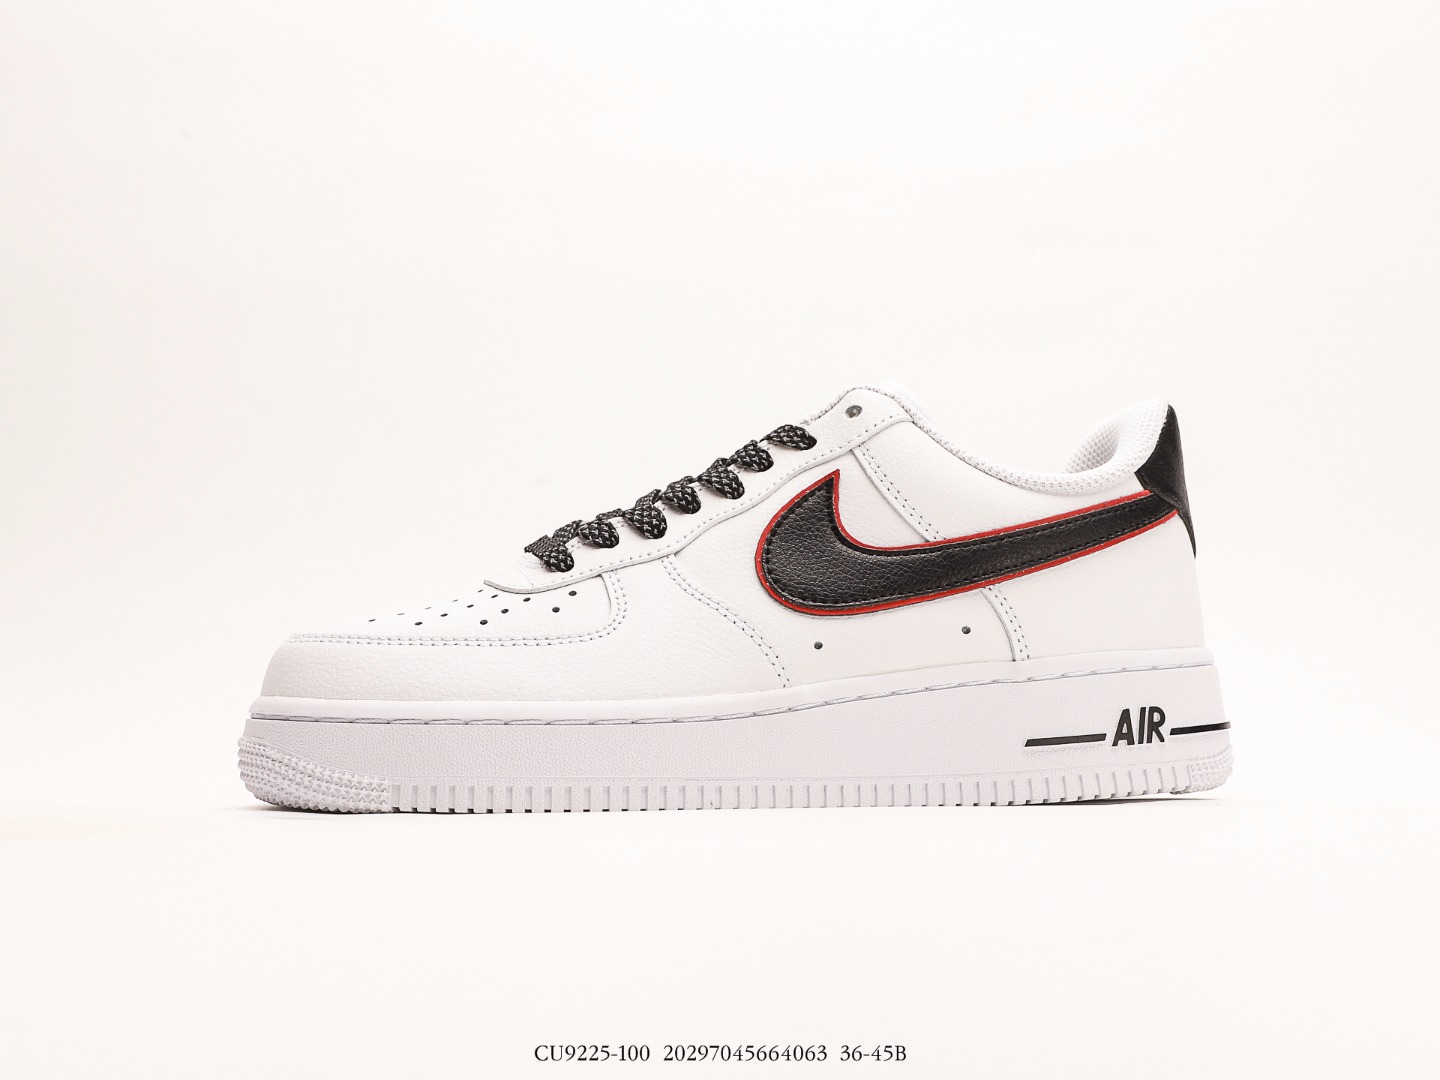 Nike Air Force 1 Low ’07 LV8 Leather